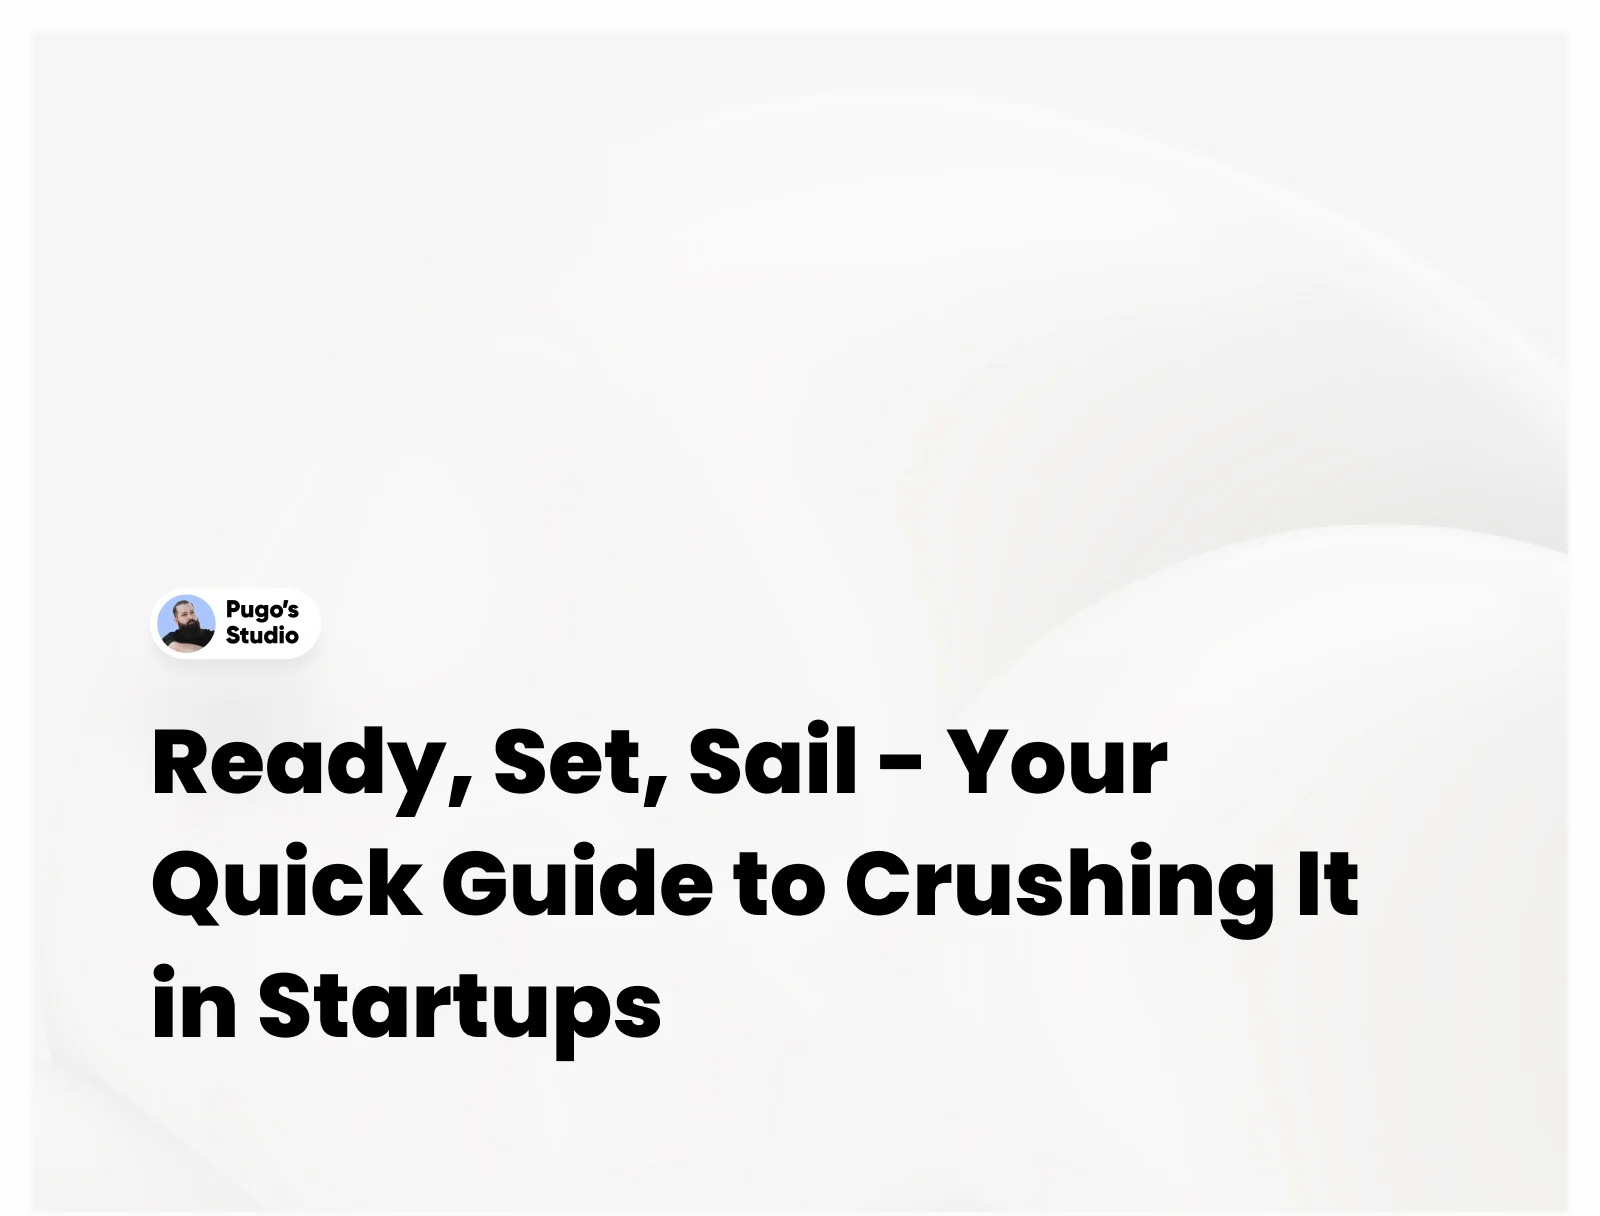 Ready, Set, Sail – Your Quick Guide to Crushing It in Startups